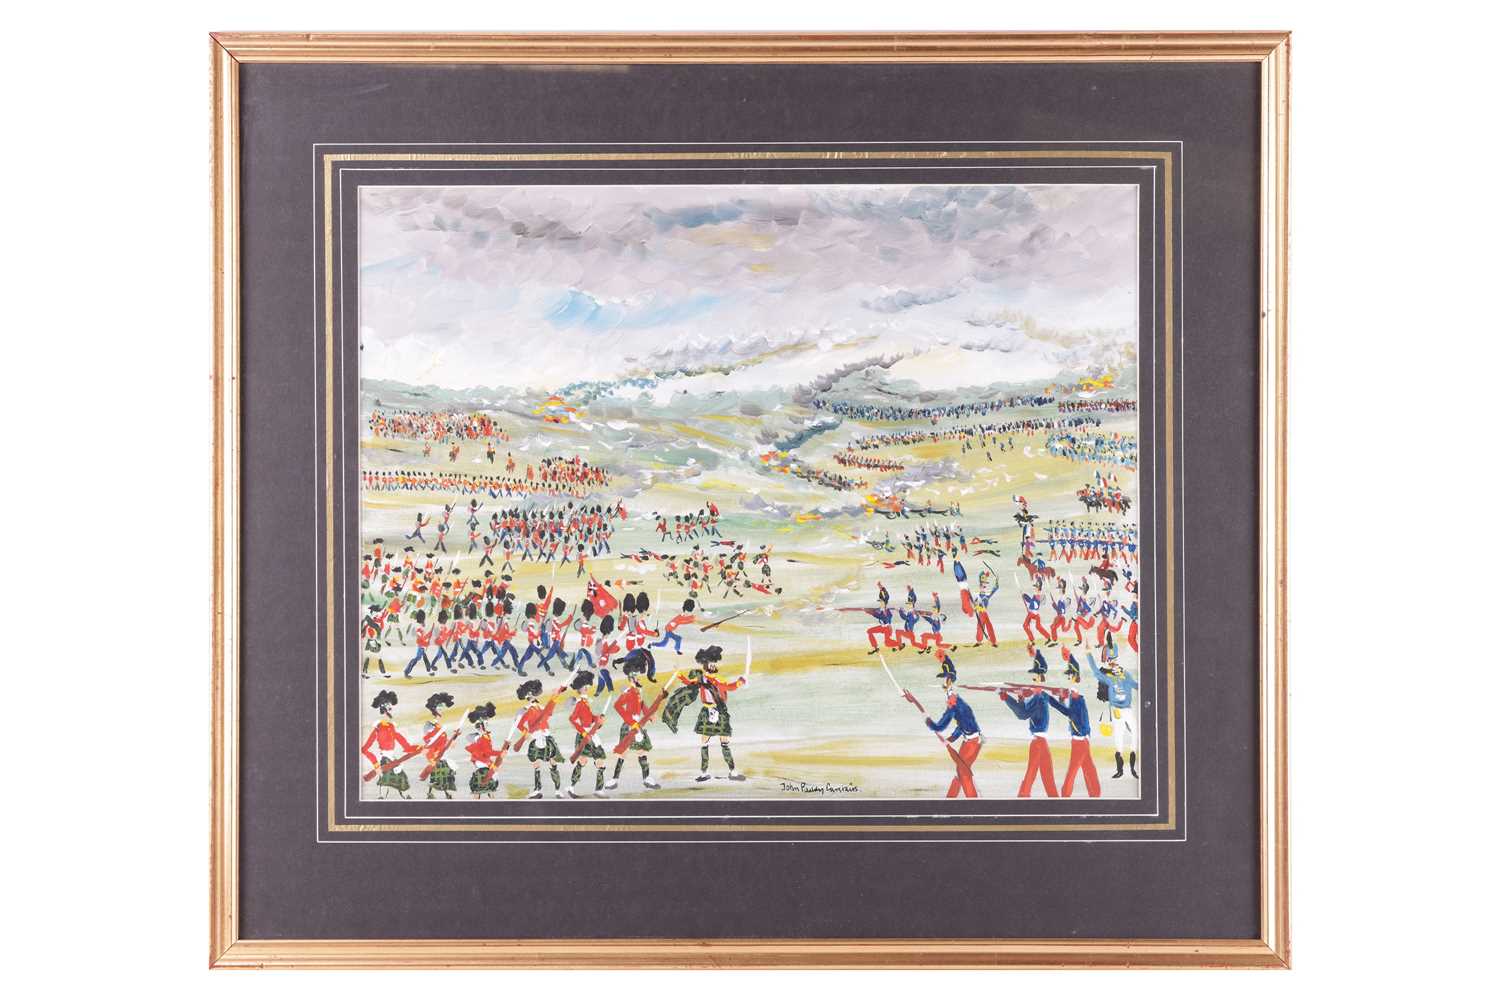 John Paddy Carstairs (1916 - 1970), Napoleonic battle scene with Scottish and French forces, signed 